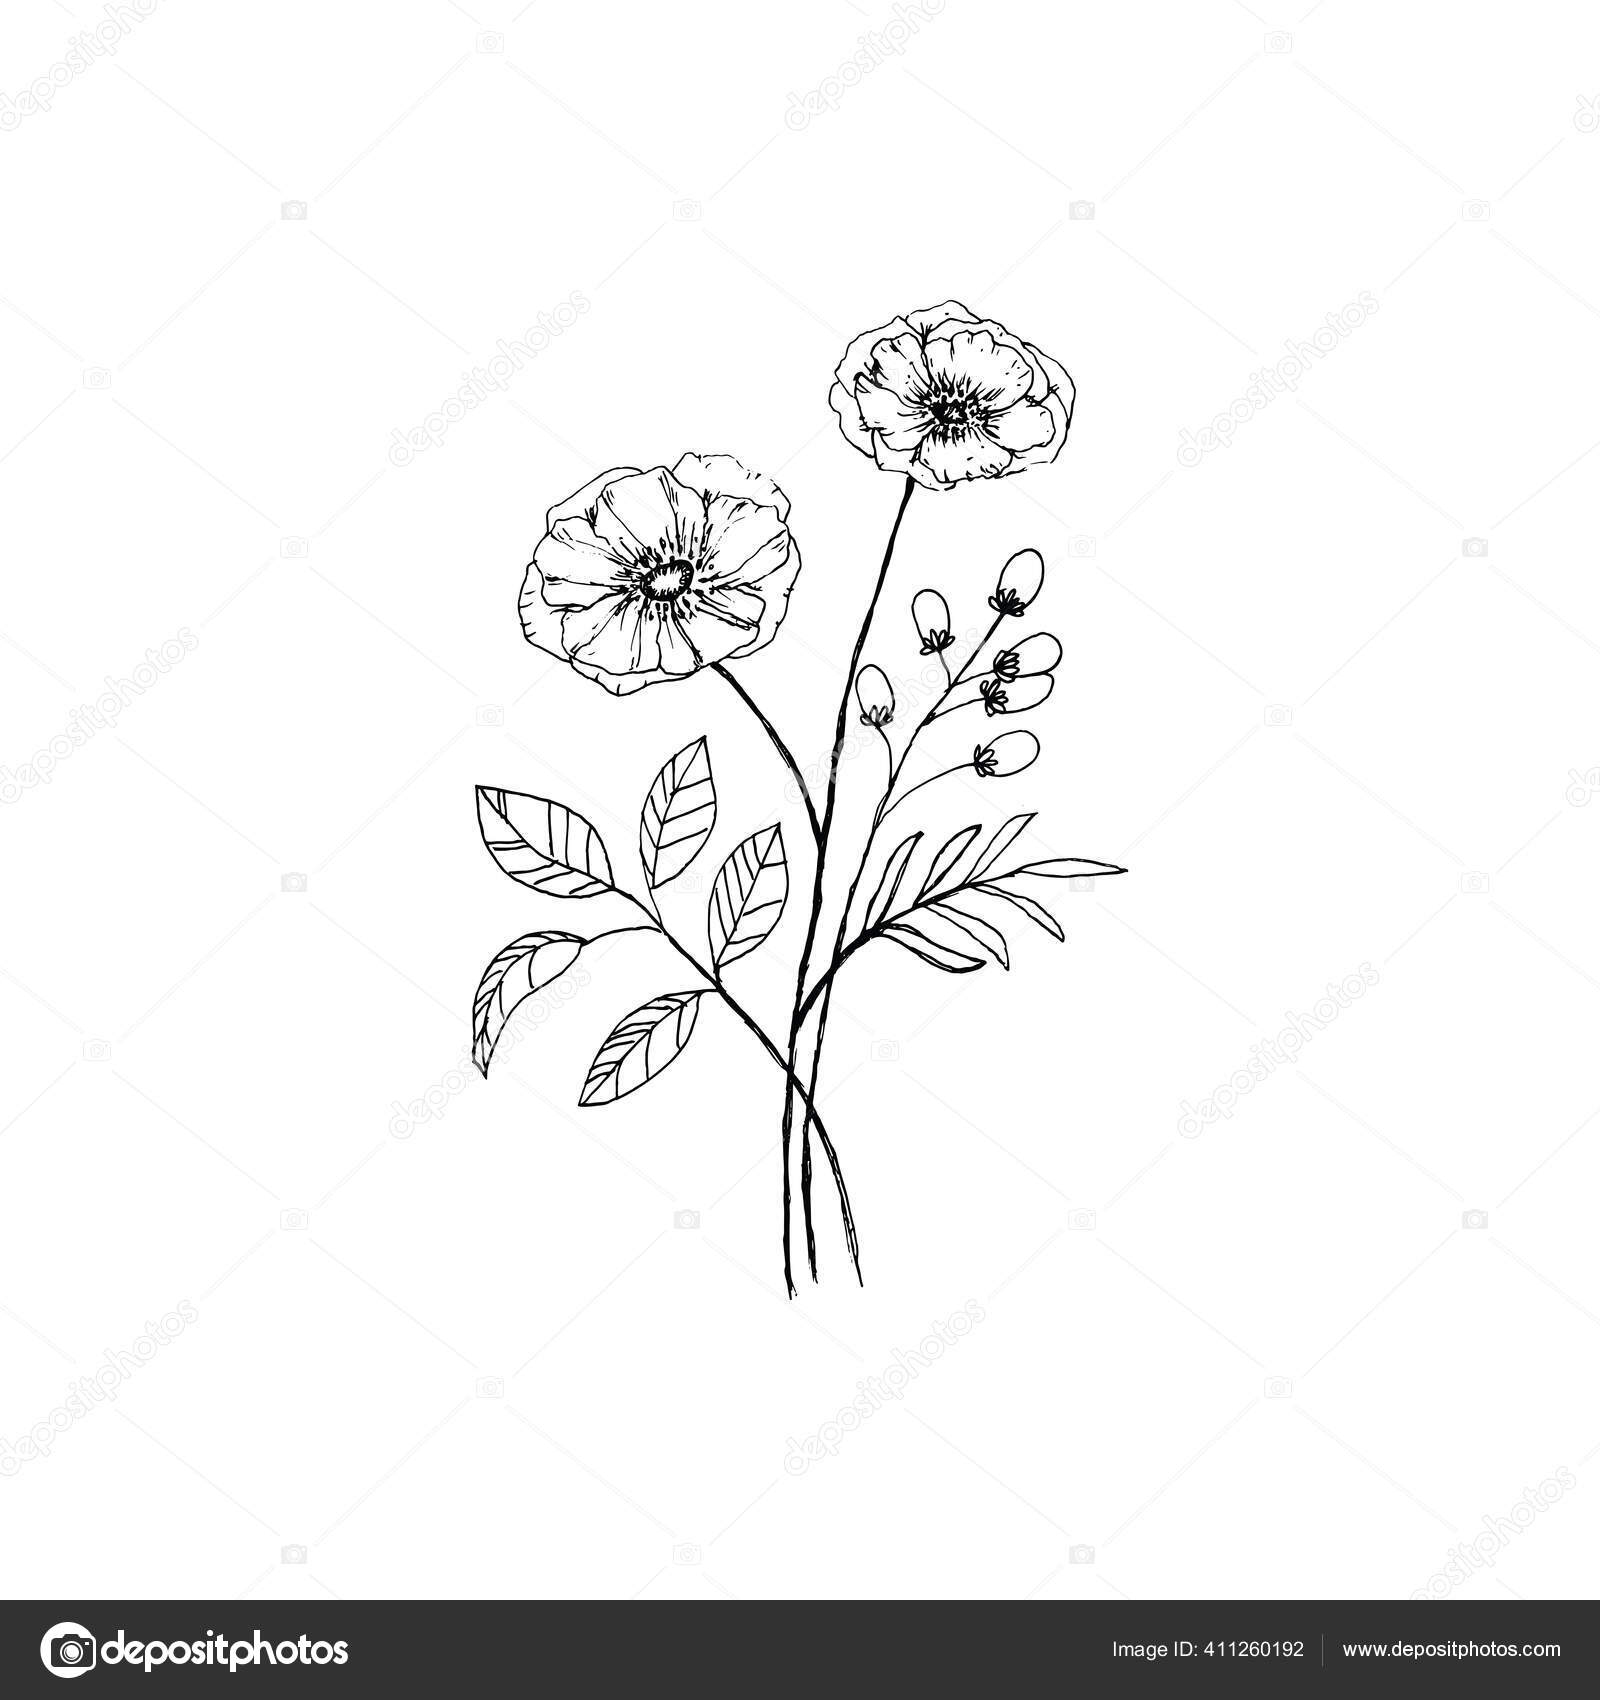 Flower Drawings  Spring 2019  Katrina Crouch  Blushed Design